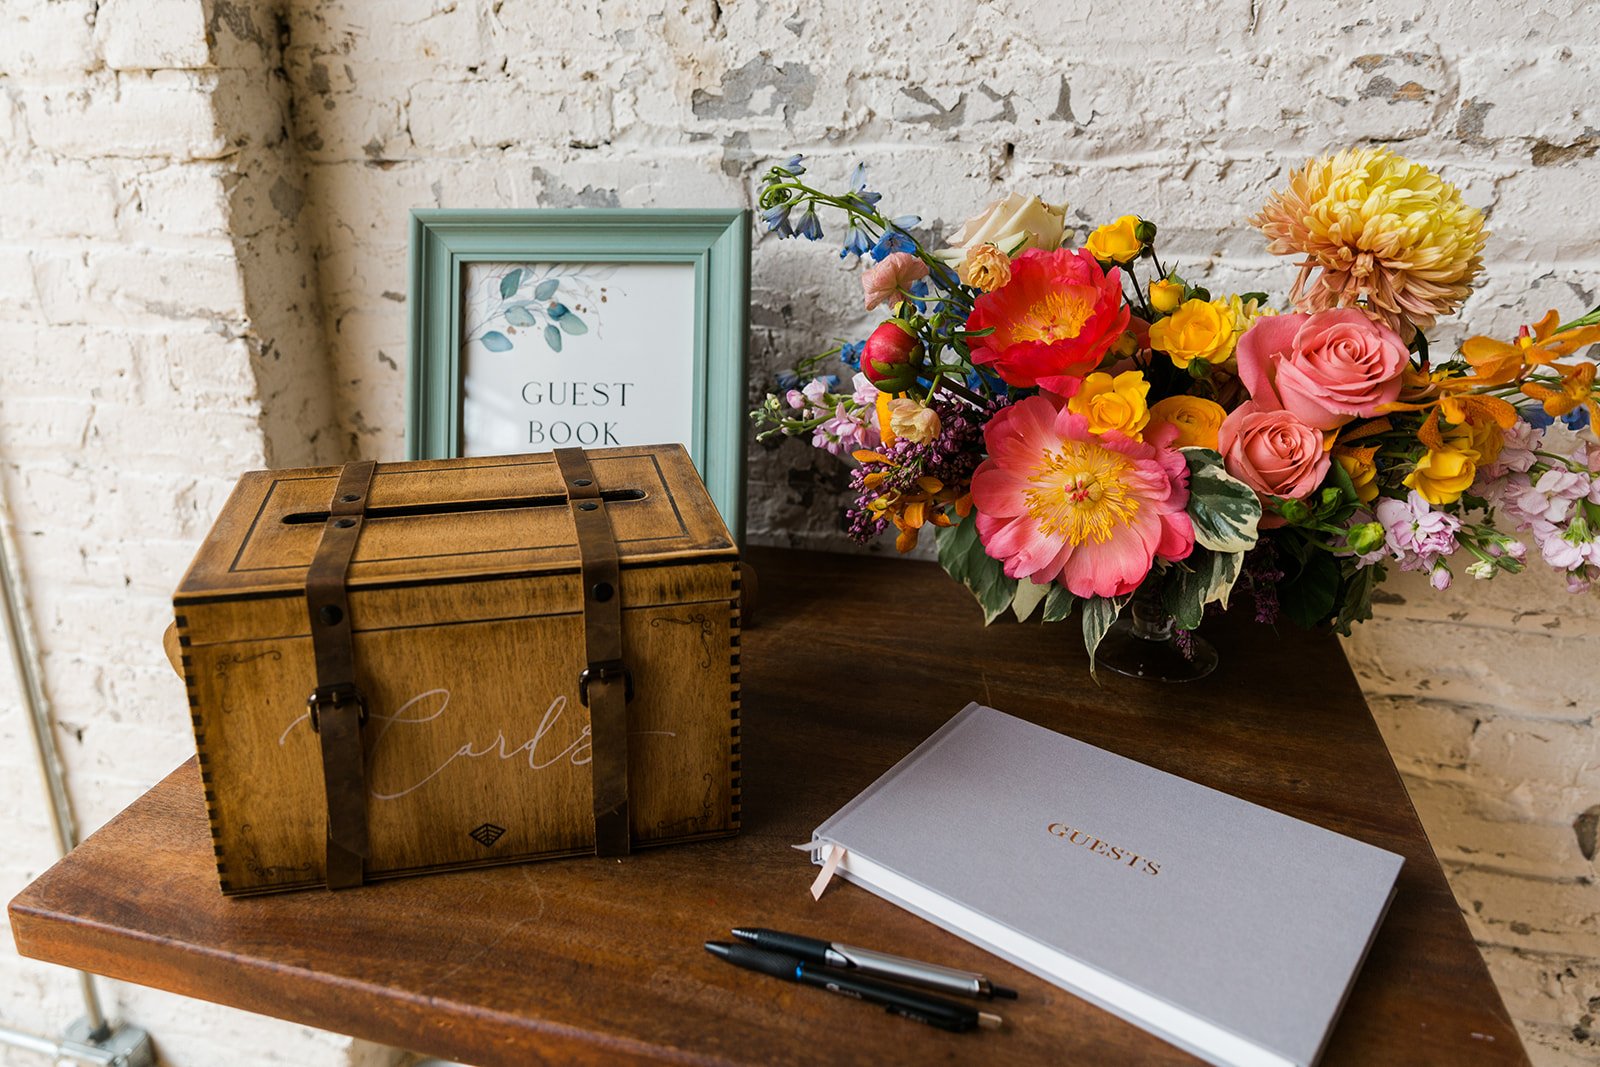  Documentary detail of wedding decor, guest book, card box and bright florals at nontraditional Jewish and Venezuelan wedding  at The Joinery Chicago an Industrial loft wedding venue In Logan Square. 